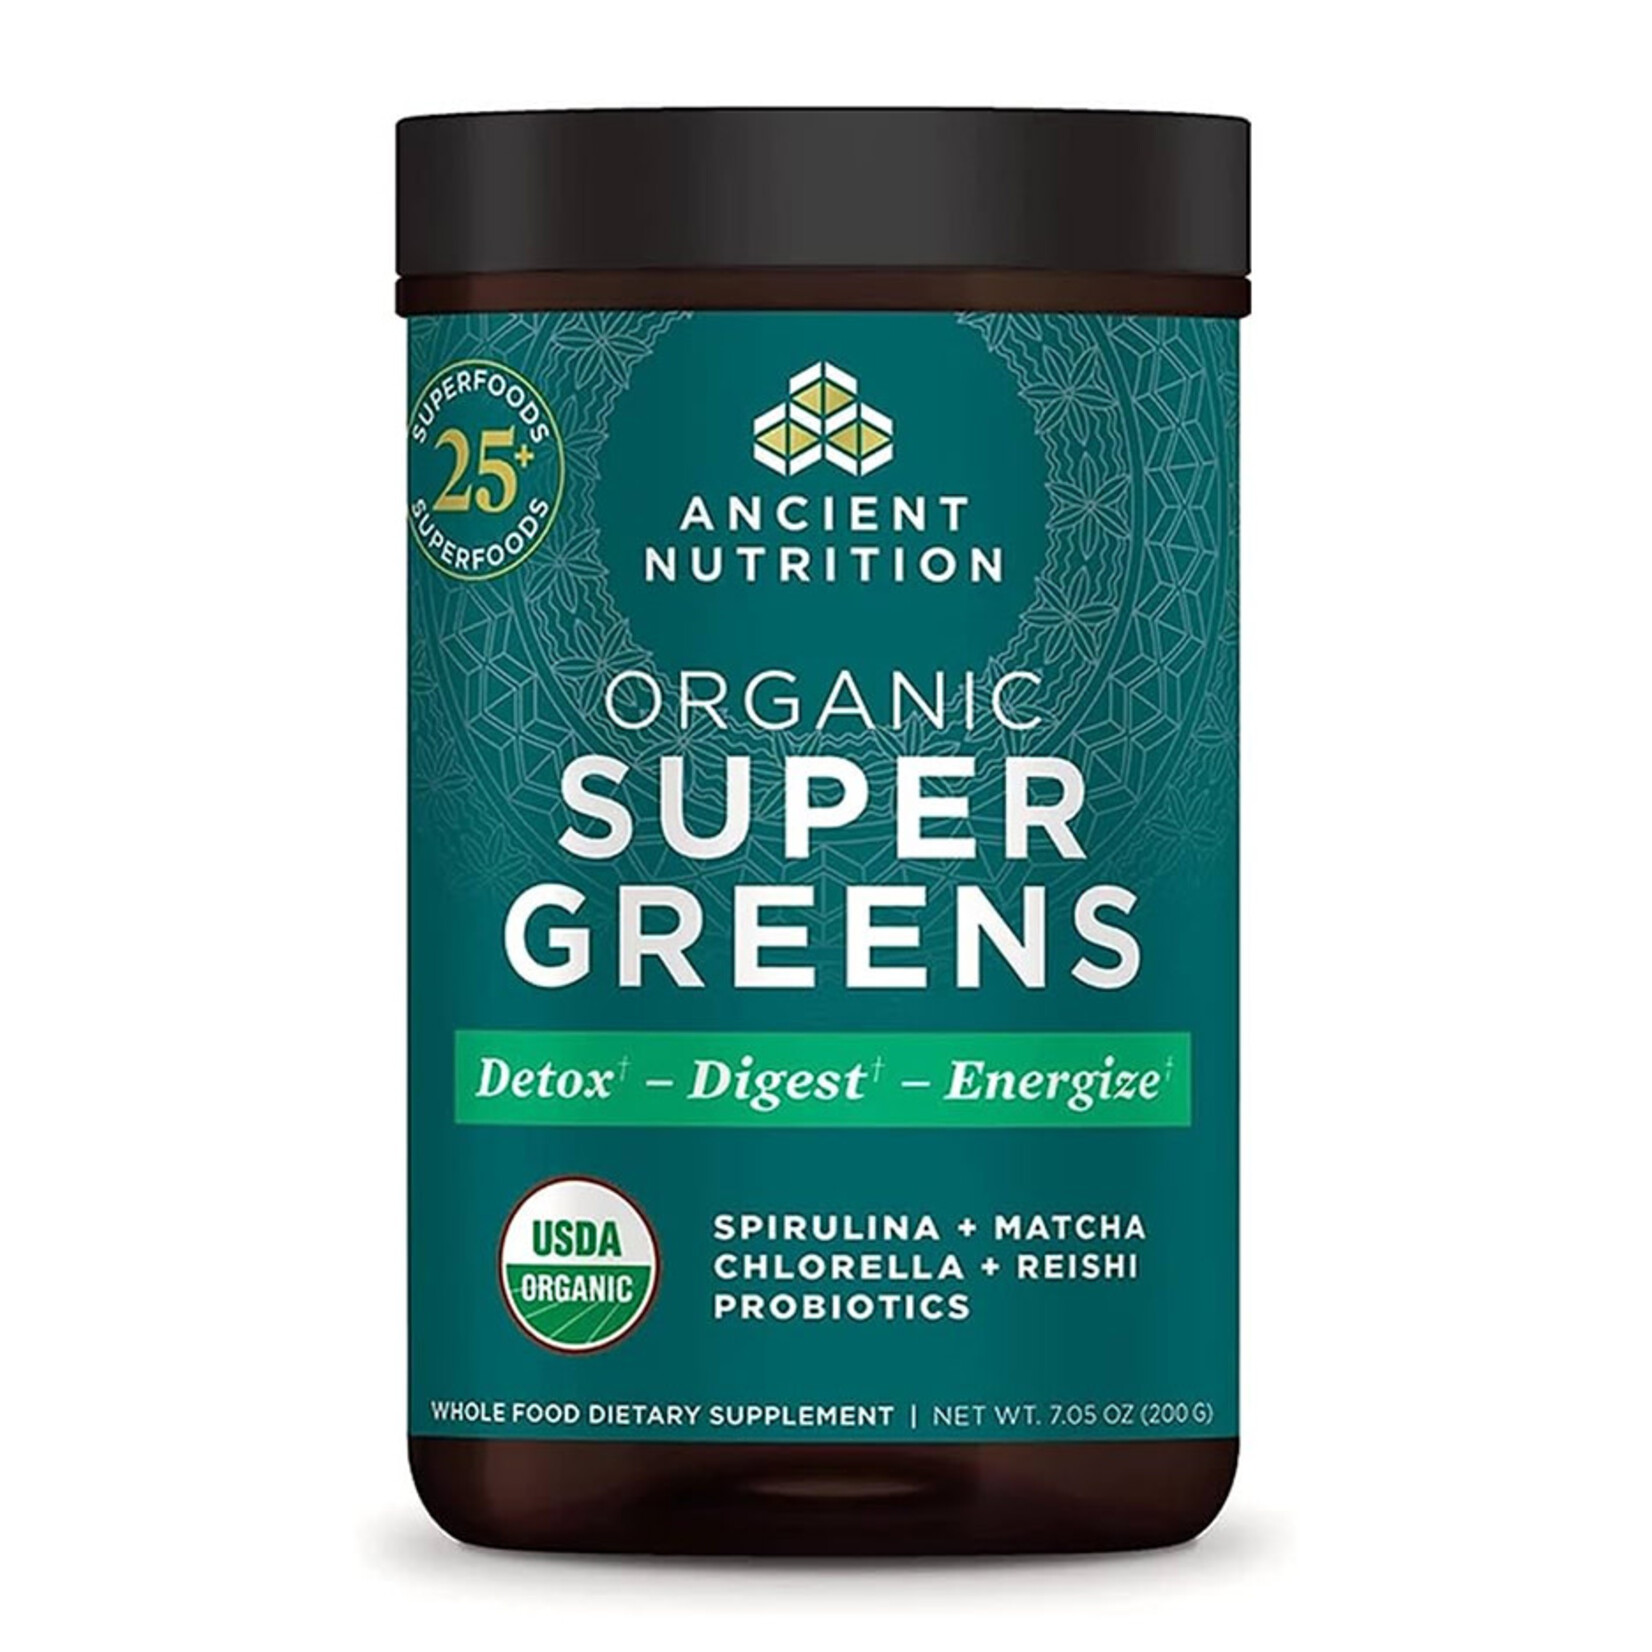 Ancient Nutrition Organic Super Greens Unflavored (7.05oz) Ancient Nutrition